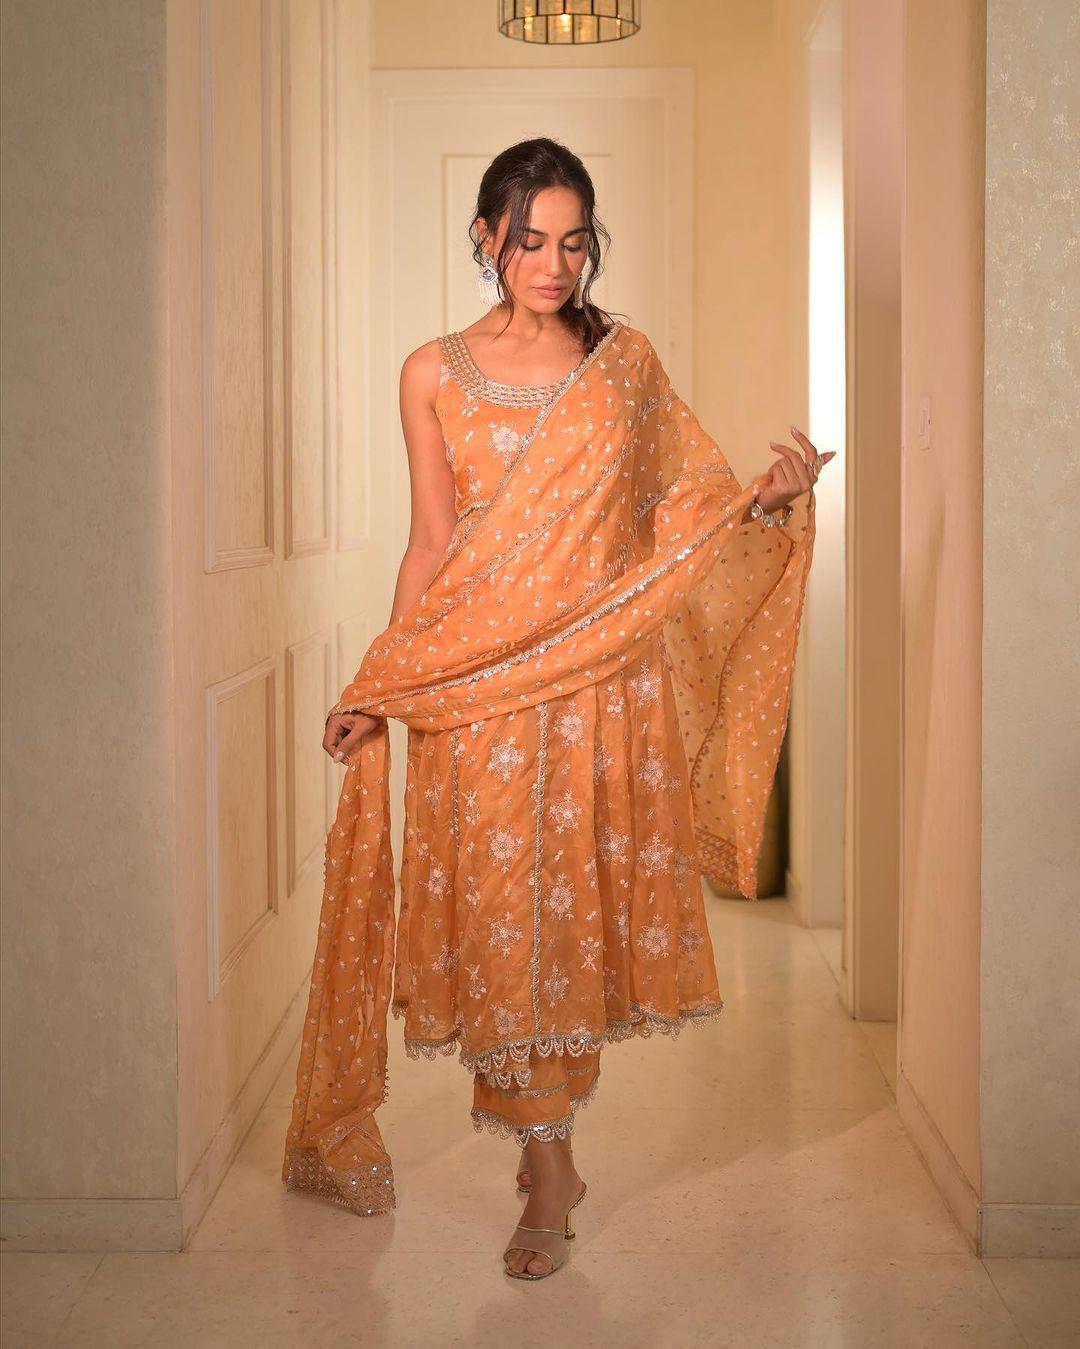 In this picture, Surbhi Jyoti donned an elegant orange embroidered suit with a matching dupatta